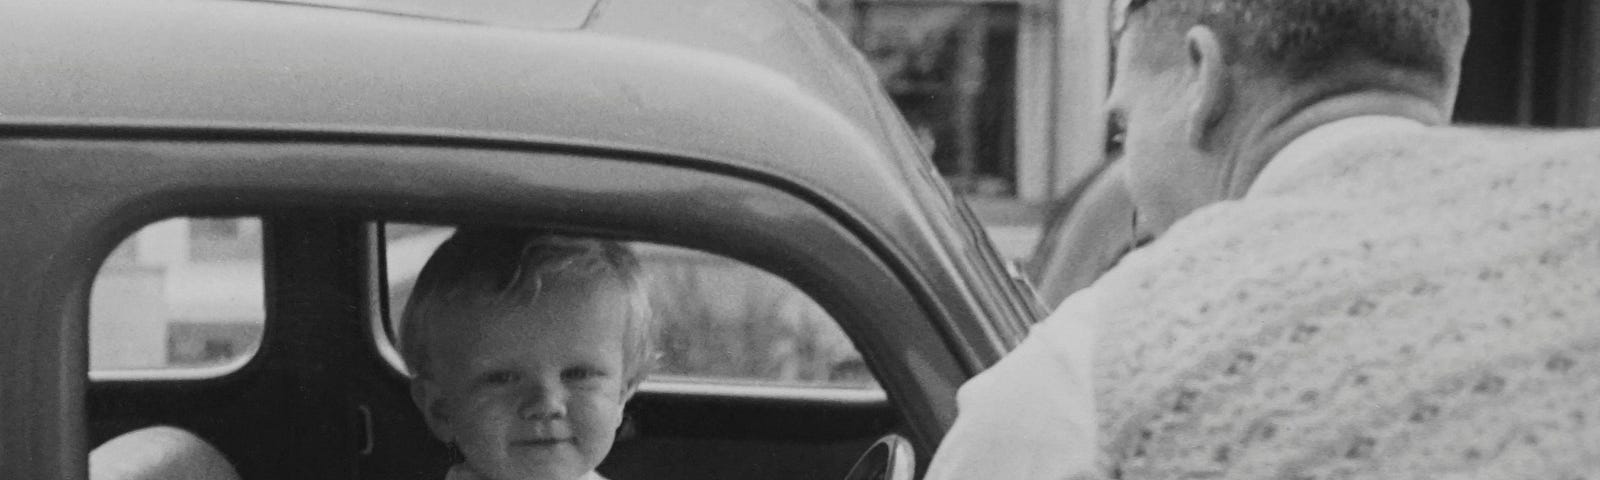 Man looking into an old car with a small boy at the driving seat looking at the camera smiling. Black and white photo.